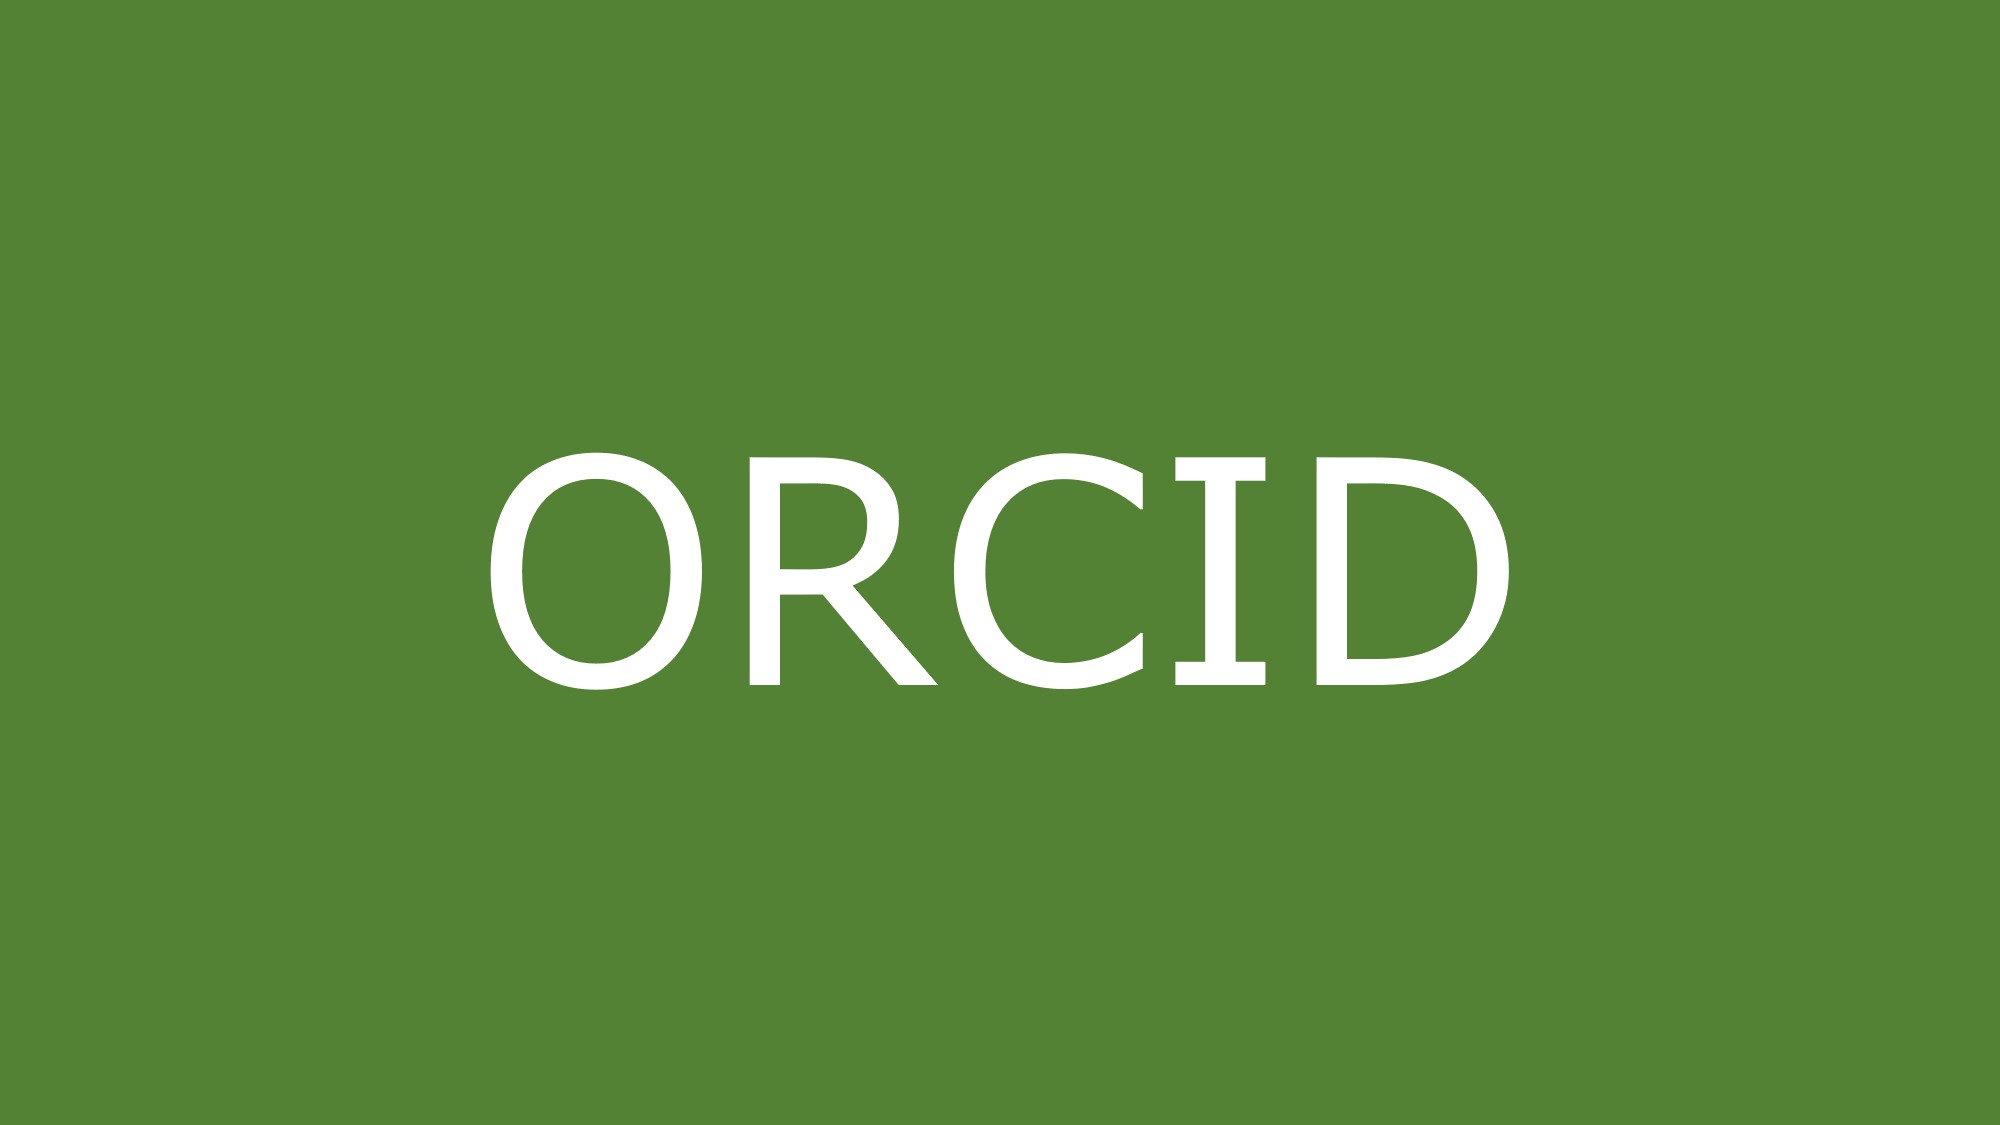 6.3 ORCID